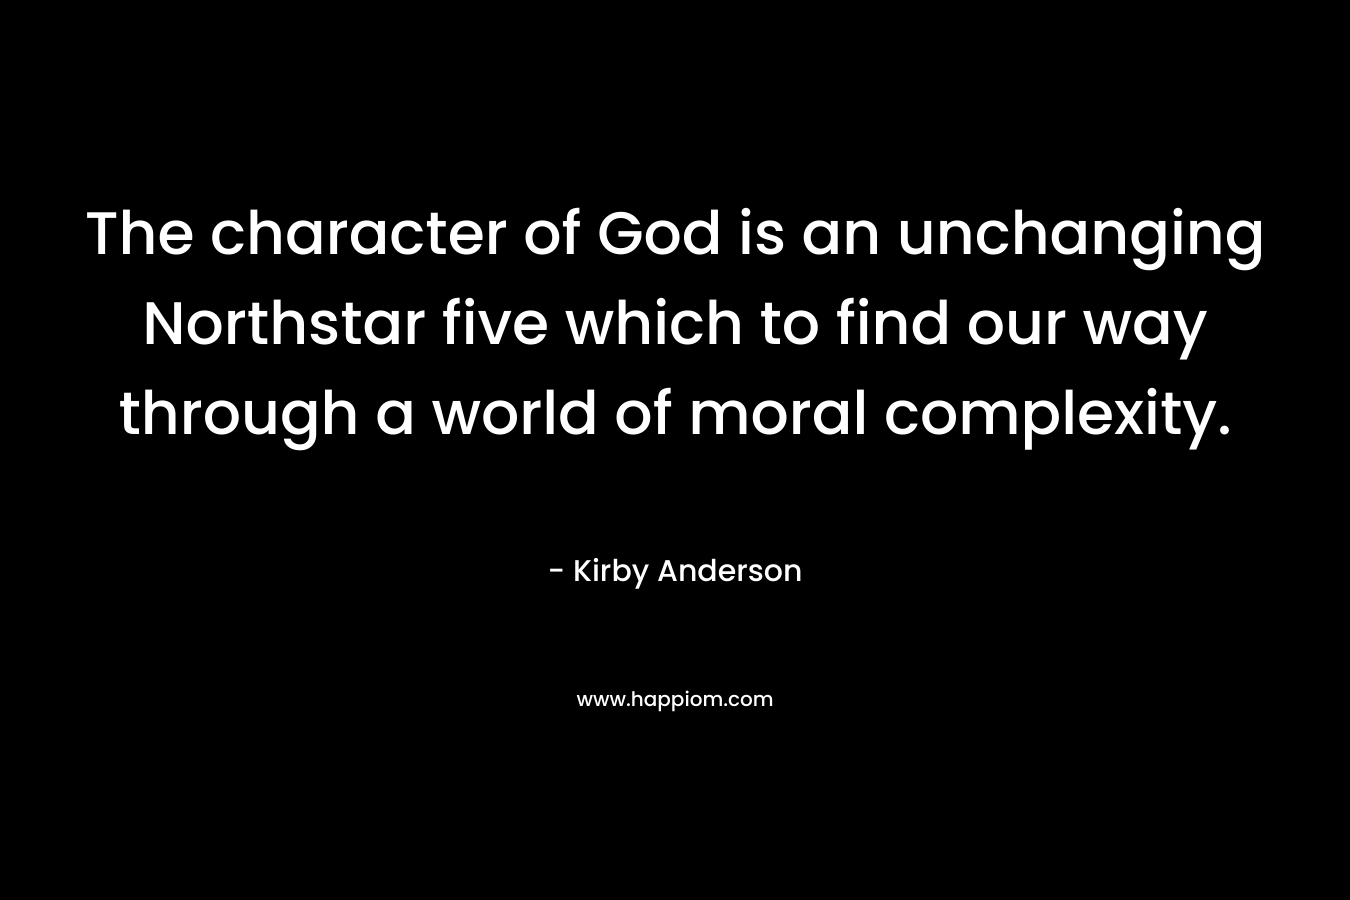 The character of God is an unchanging Northstar five which to find our way through a world of moral complexity. – Kirby Anderson